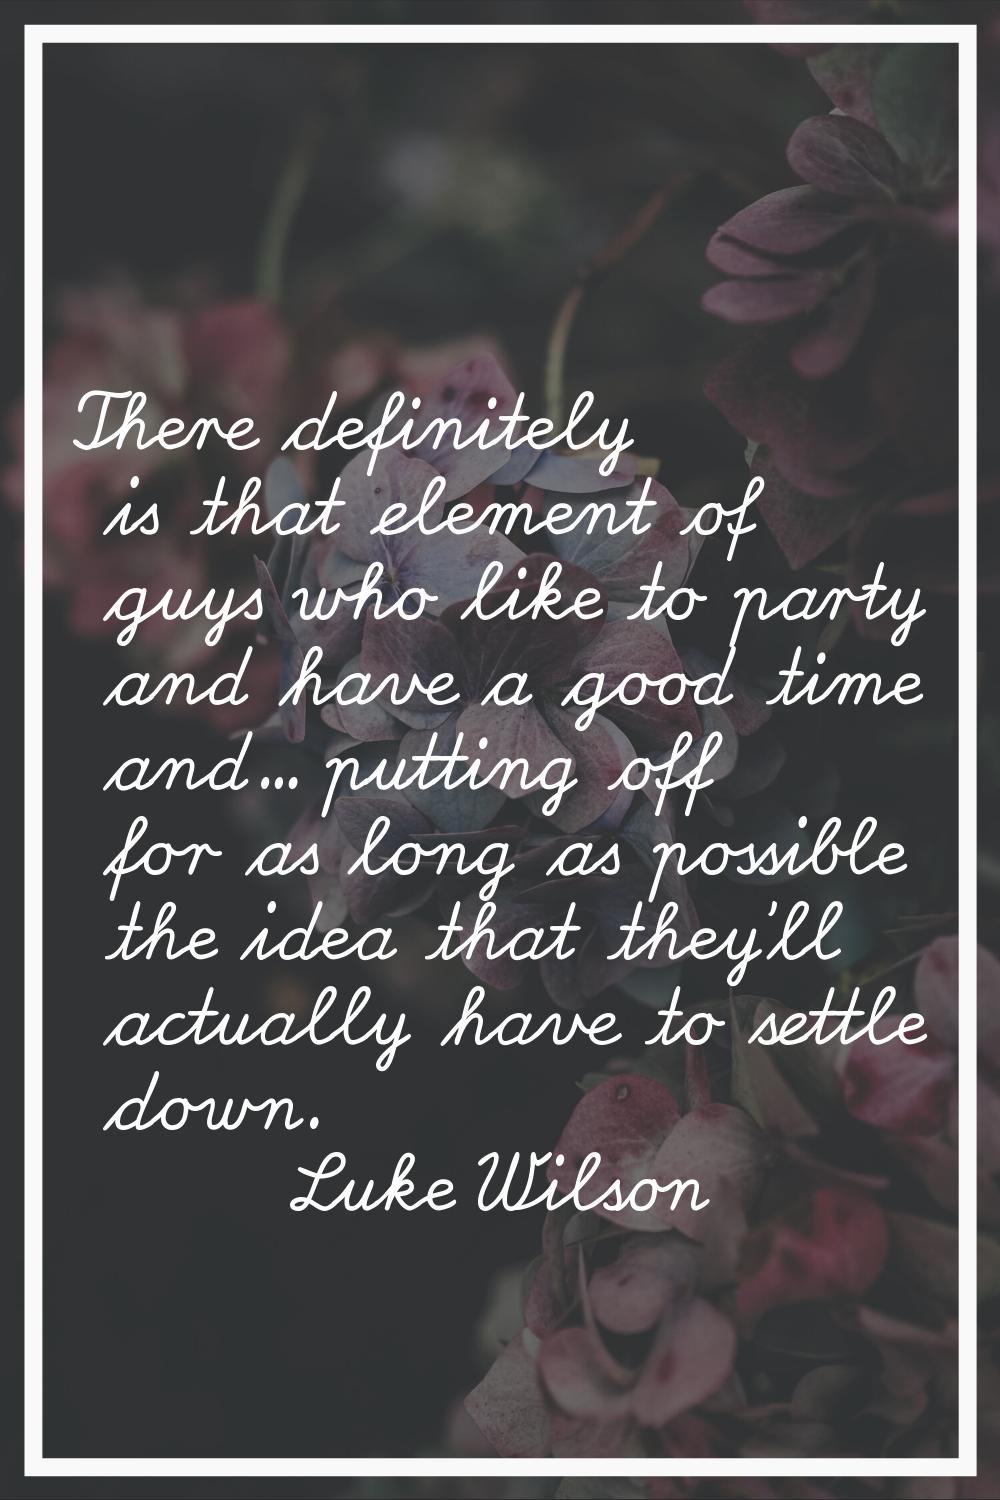 There definitely is that element of guys who like to party and have a good time and... putting off 